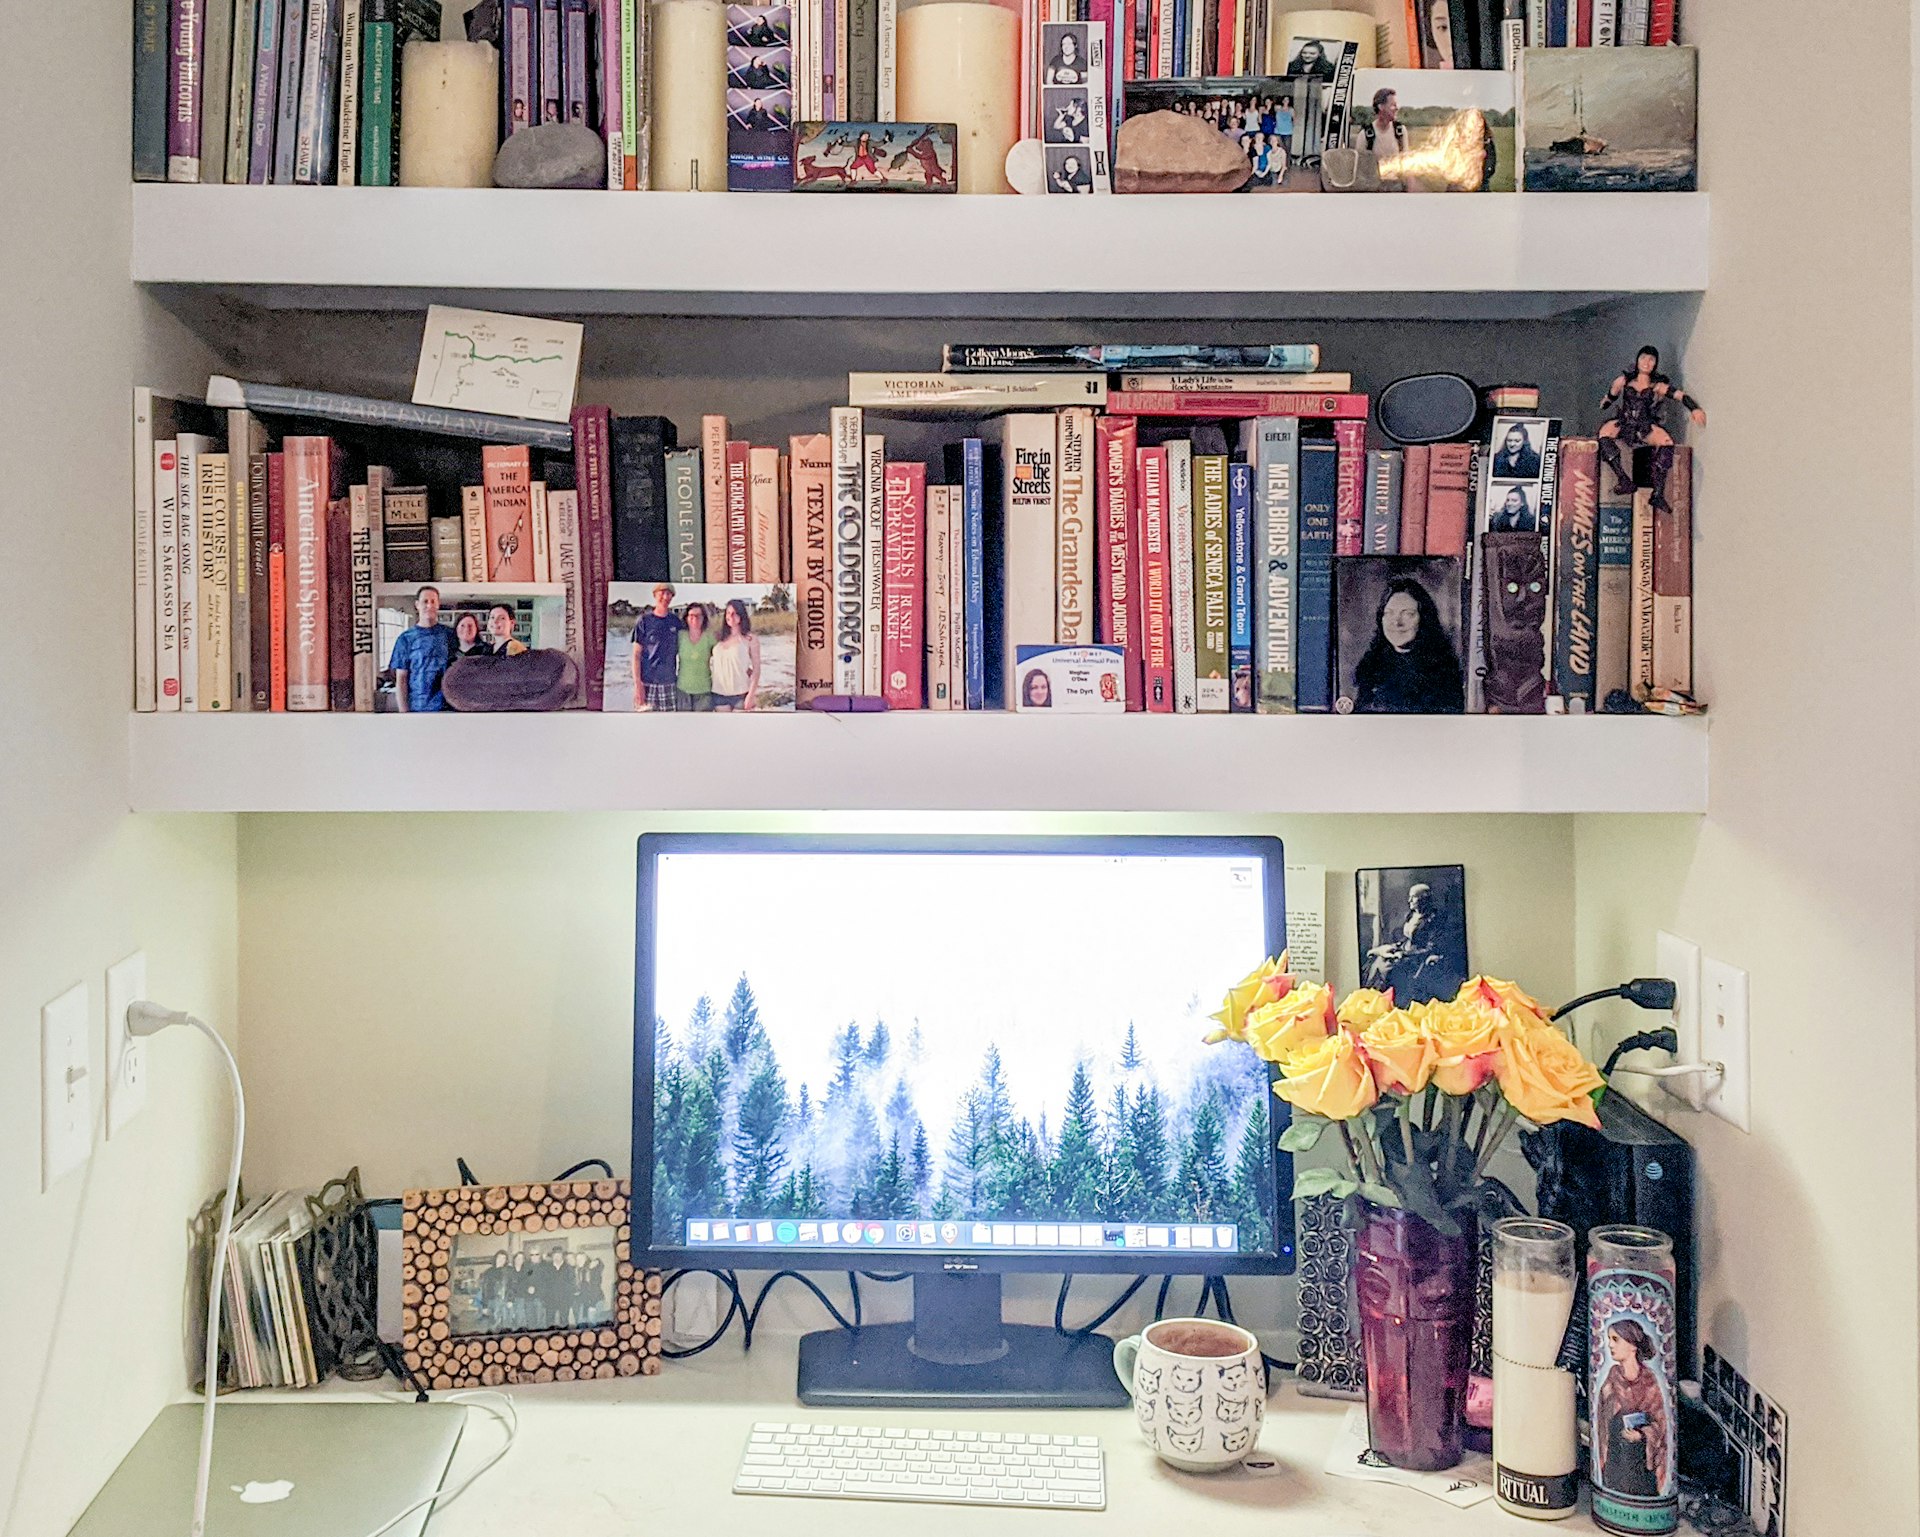 A home office setup that consists of a desk under a bookshelf full of colorful volumes. A vase of yellow roses sits on the desk next to a computer monitor, keyboard, mouse, and laptop, surrounded by framed photos and mementos